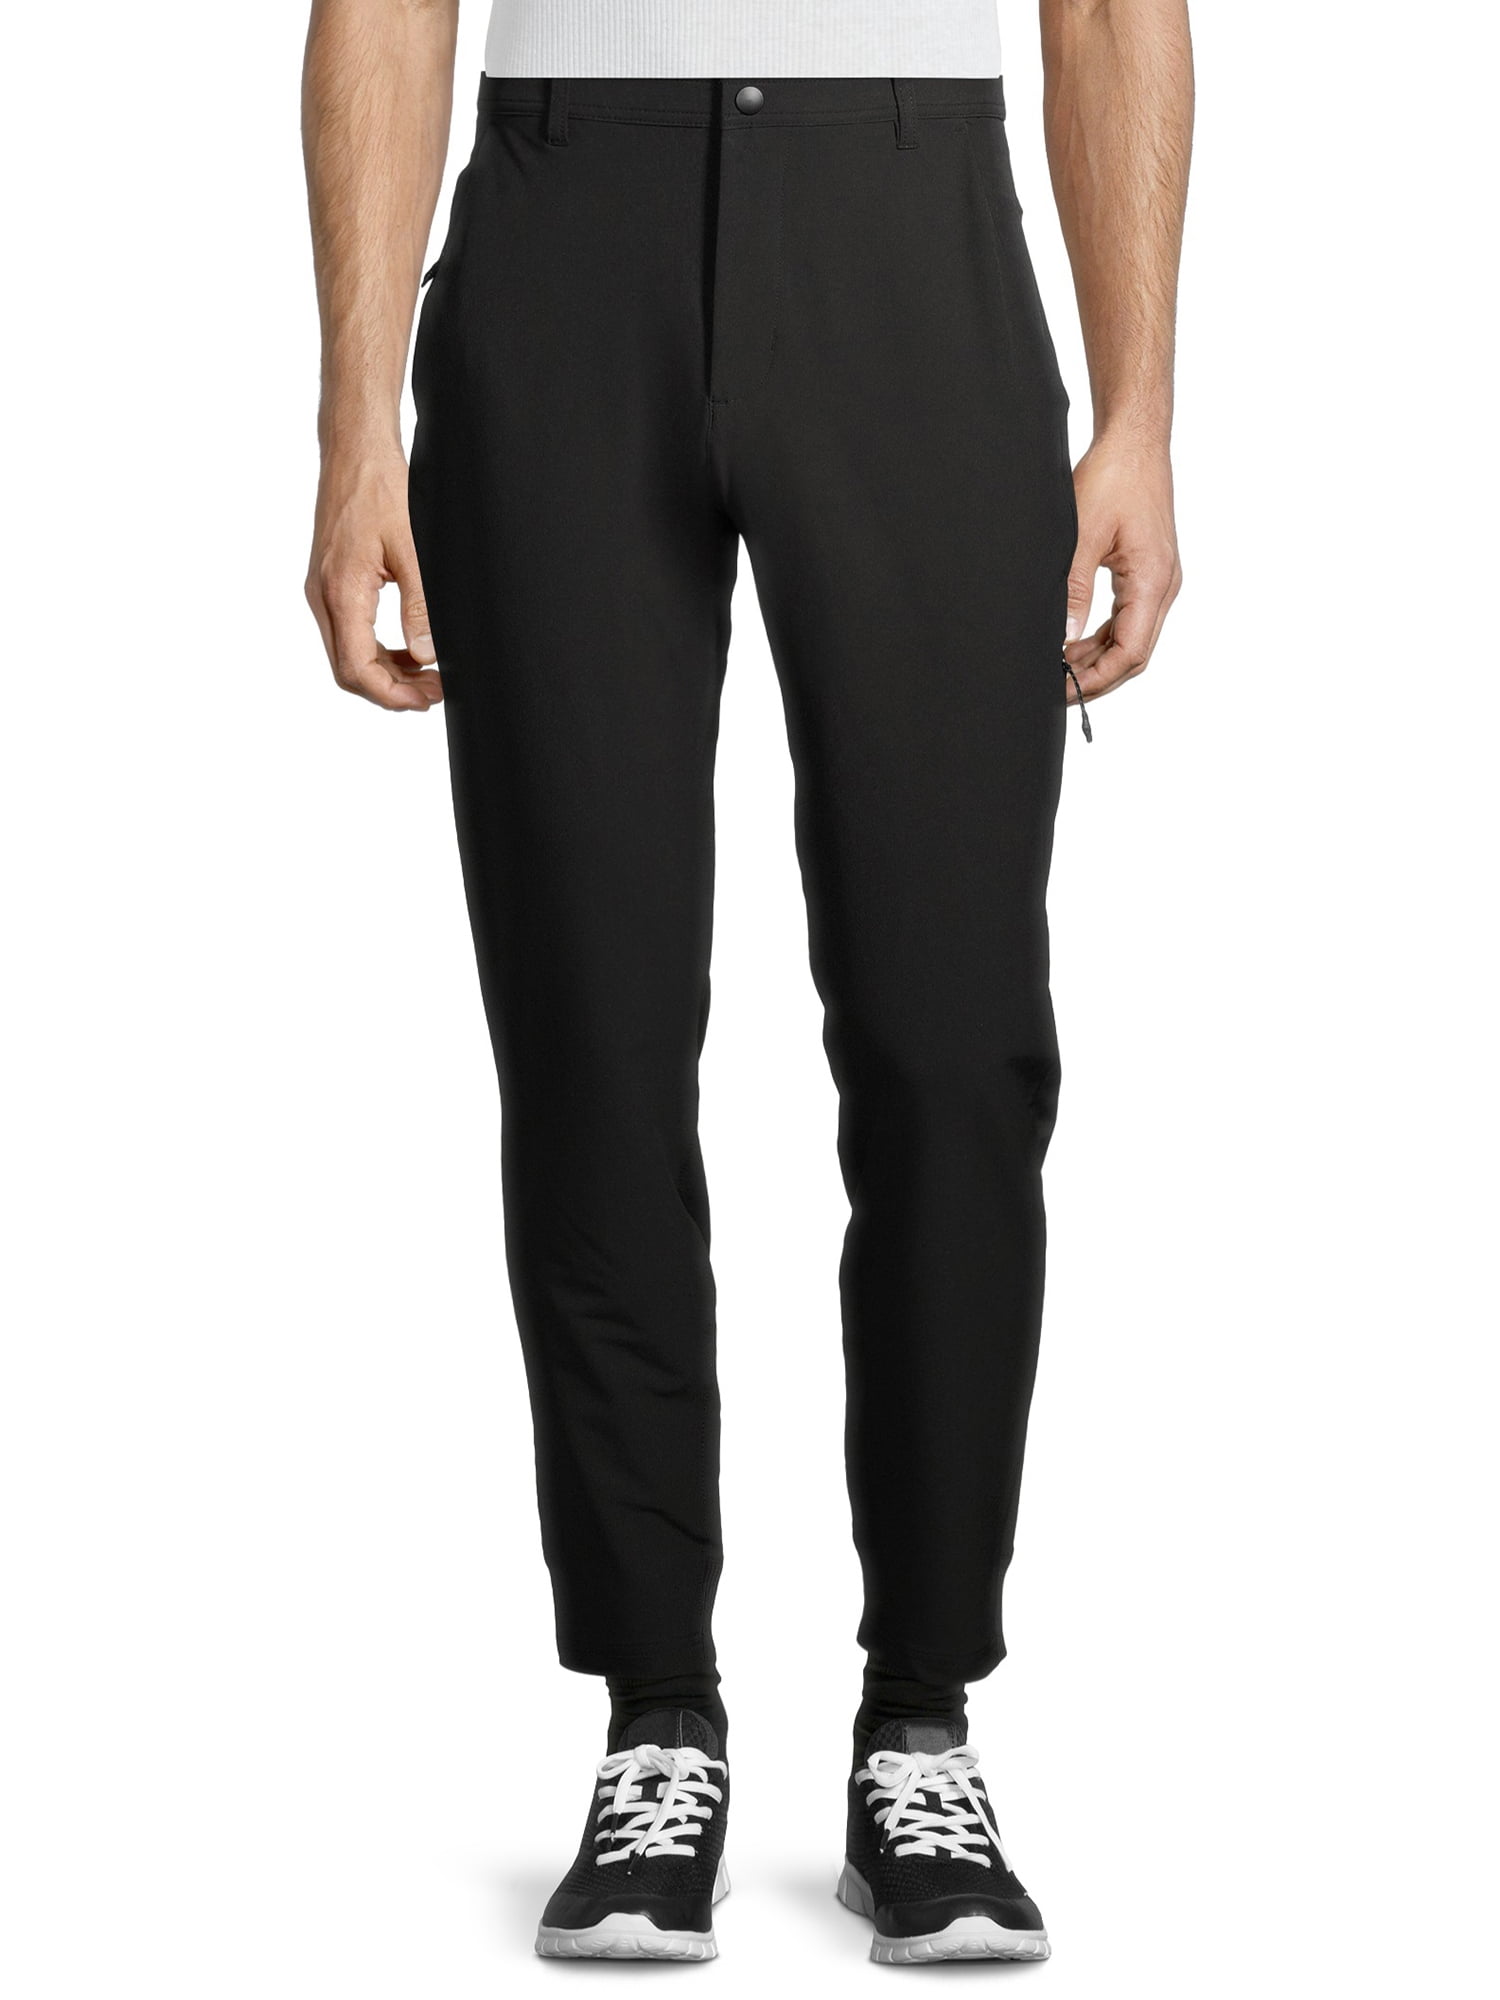 Russell Men's Athletic Woven Tech Pants, up to 5XL - Walmart.com